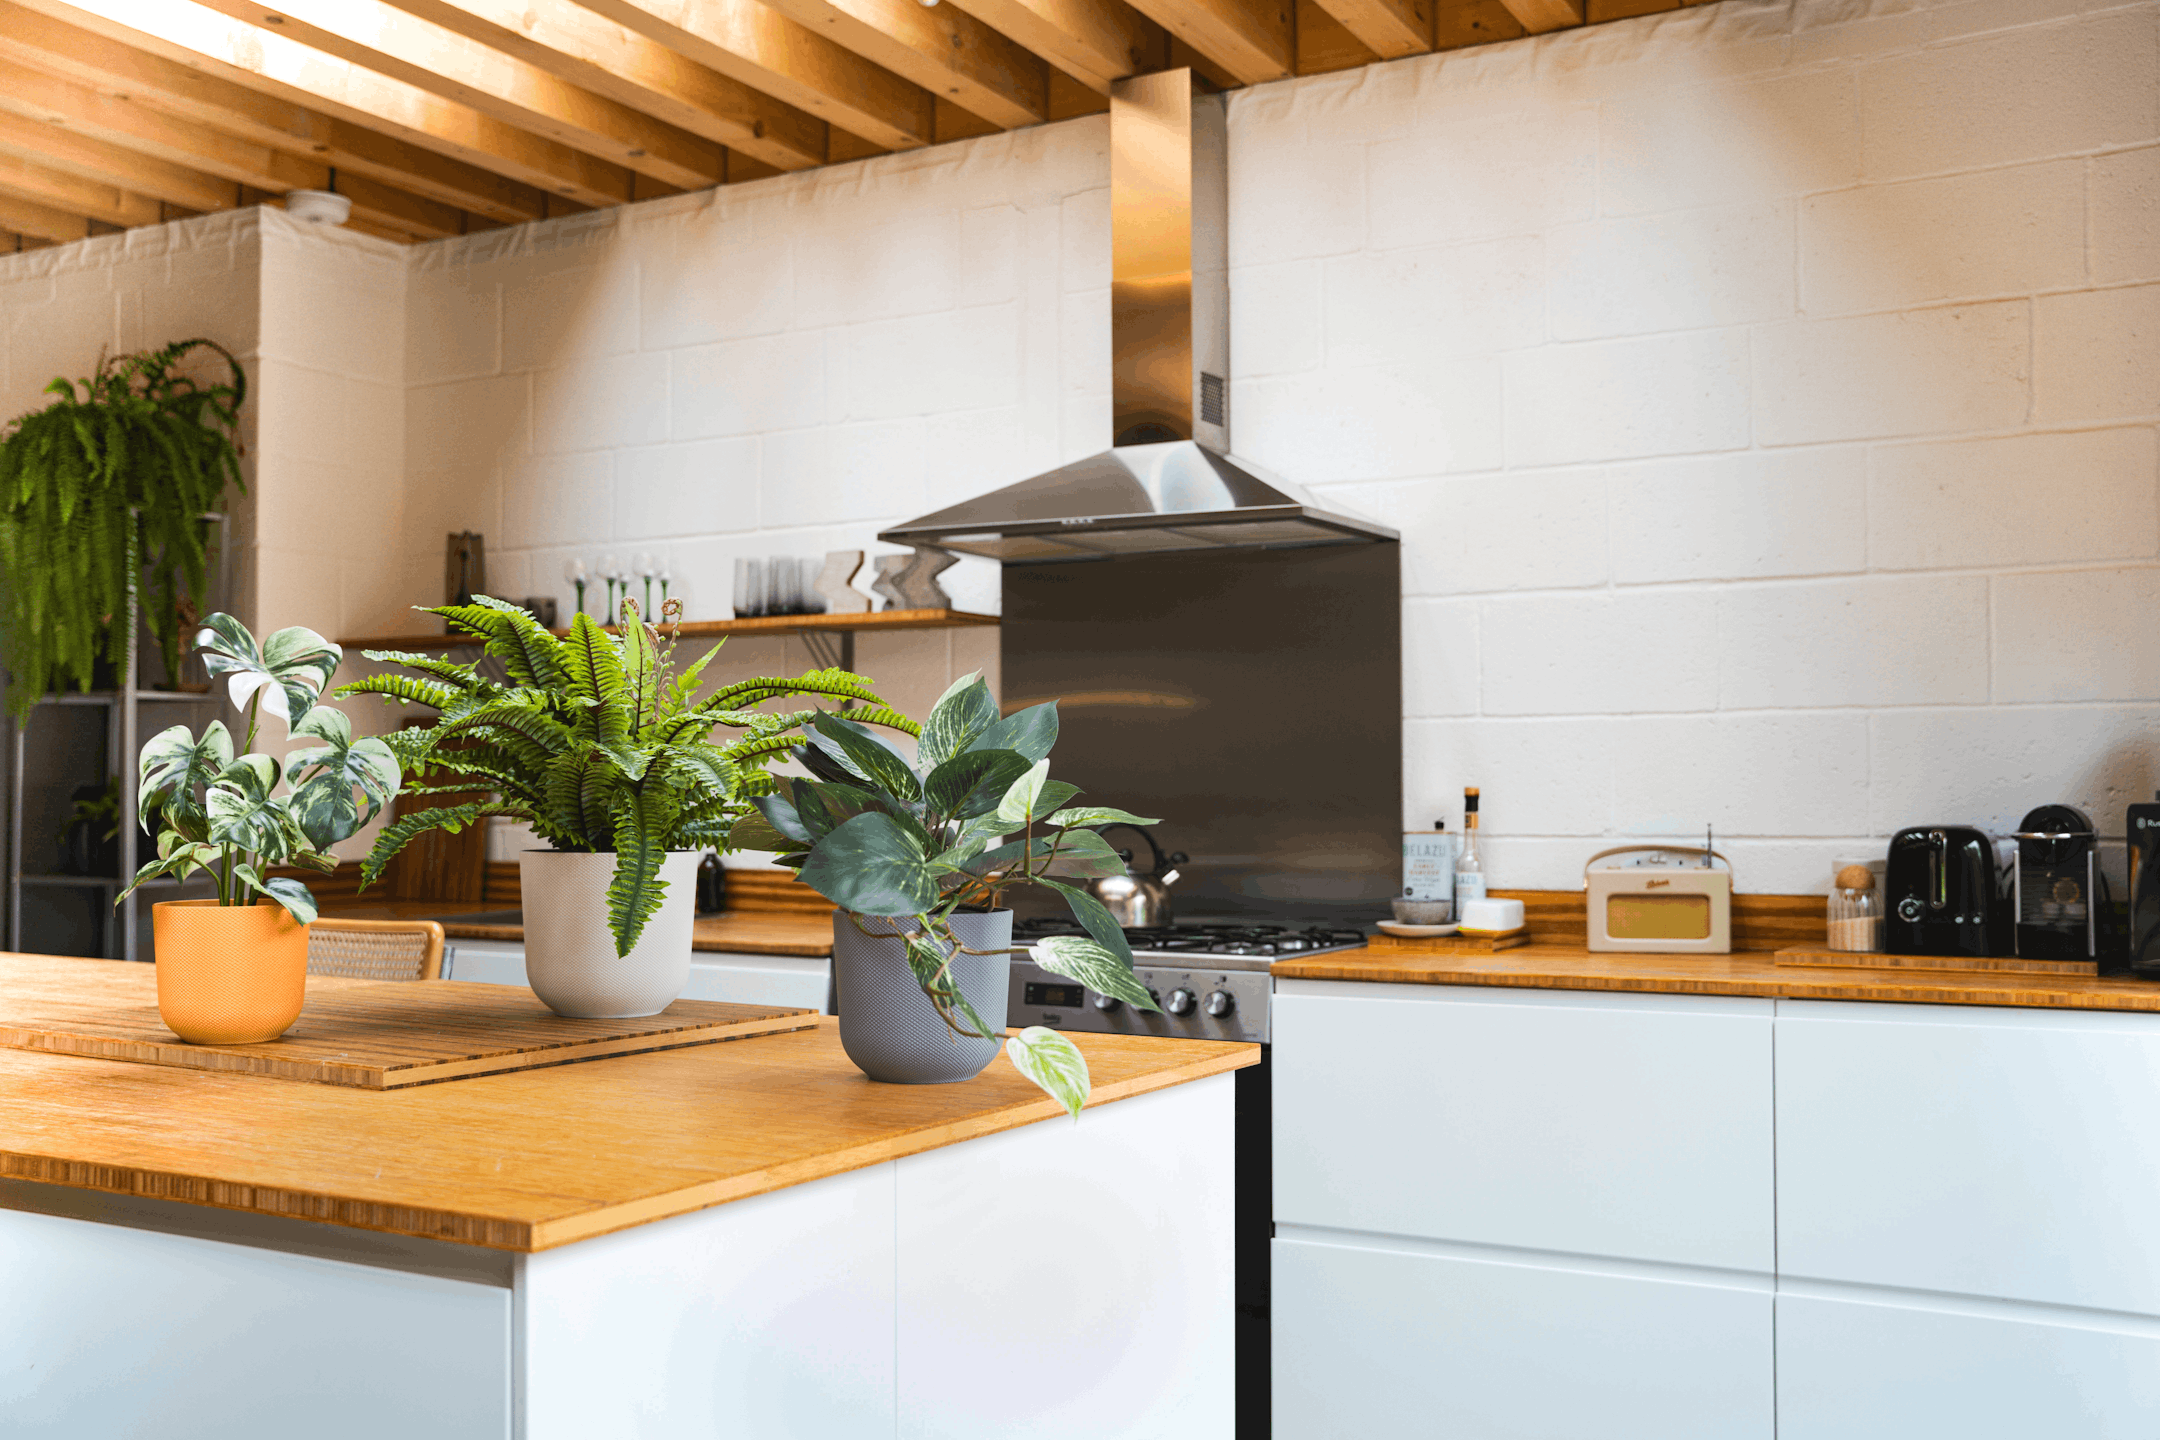 Small artificial plants in colourful pots on kitchen worktop